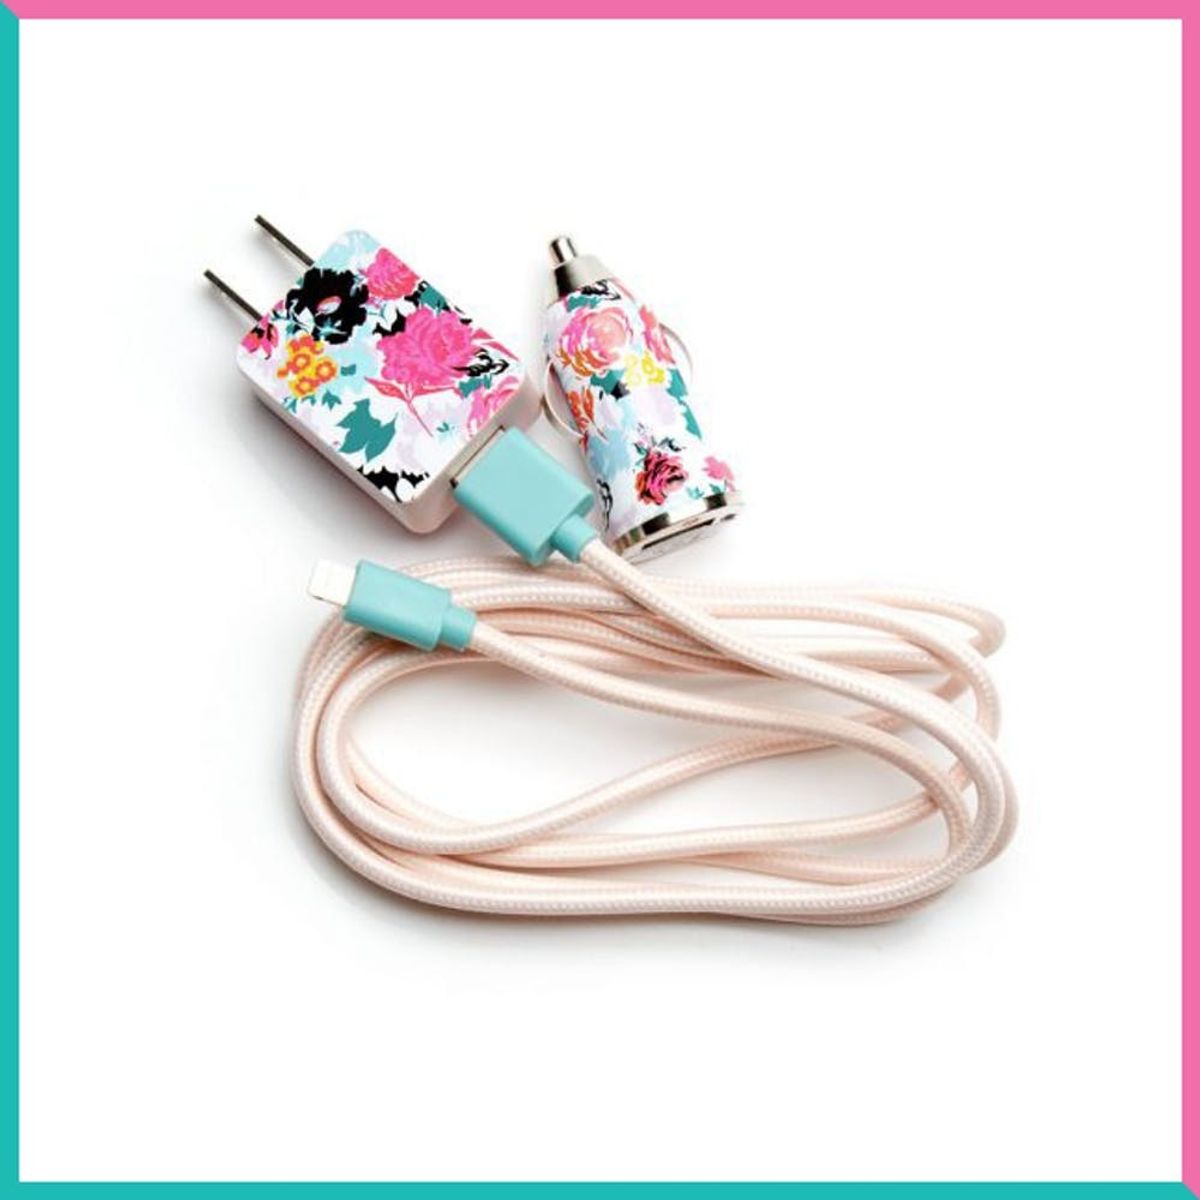 24 Back-to-School Tech Accessories for Busy Girls Everywhere